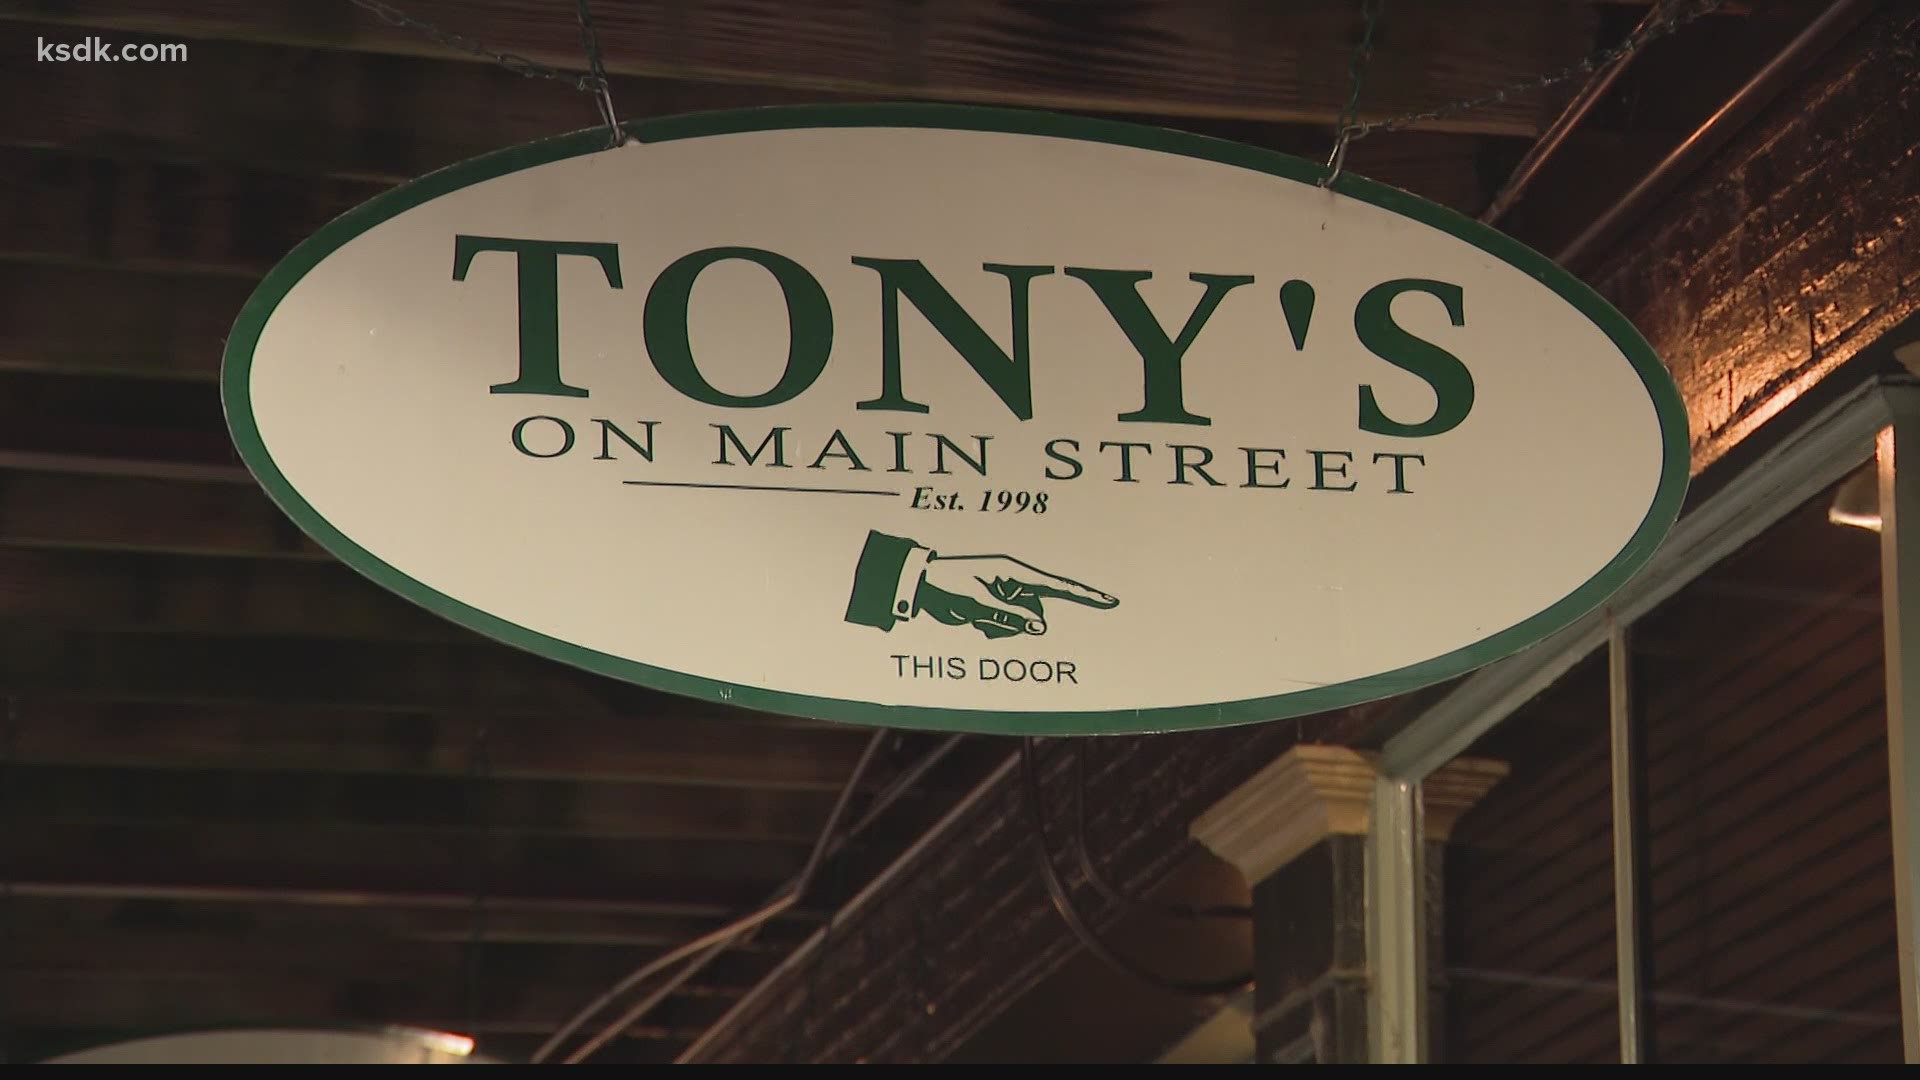 The restaurants are requesting a temporary restraining order to allow late-night hours.